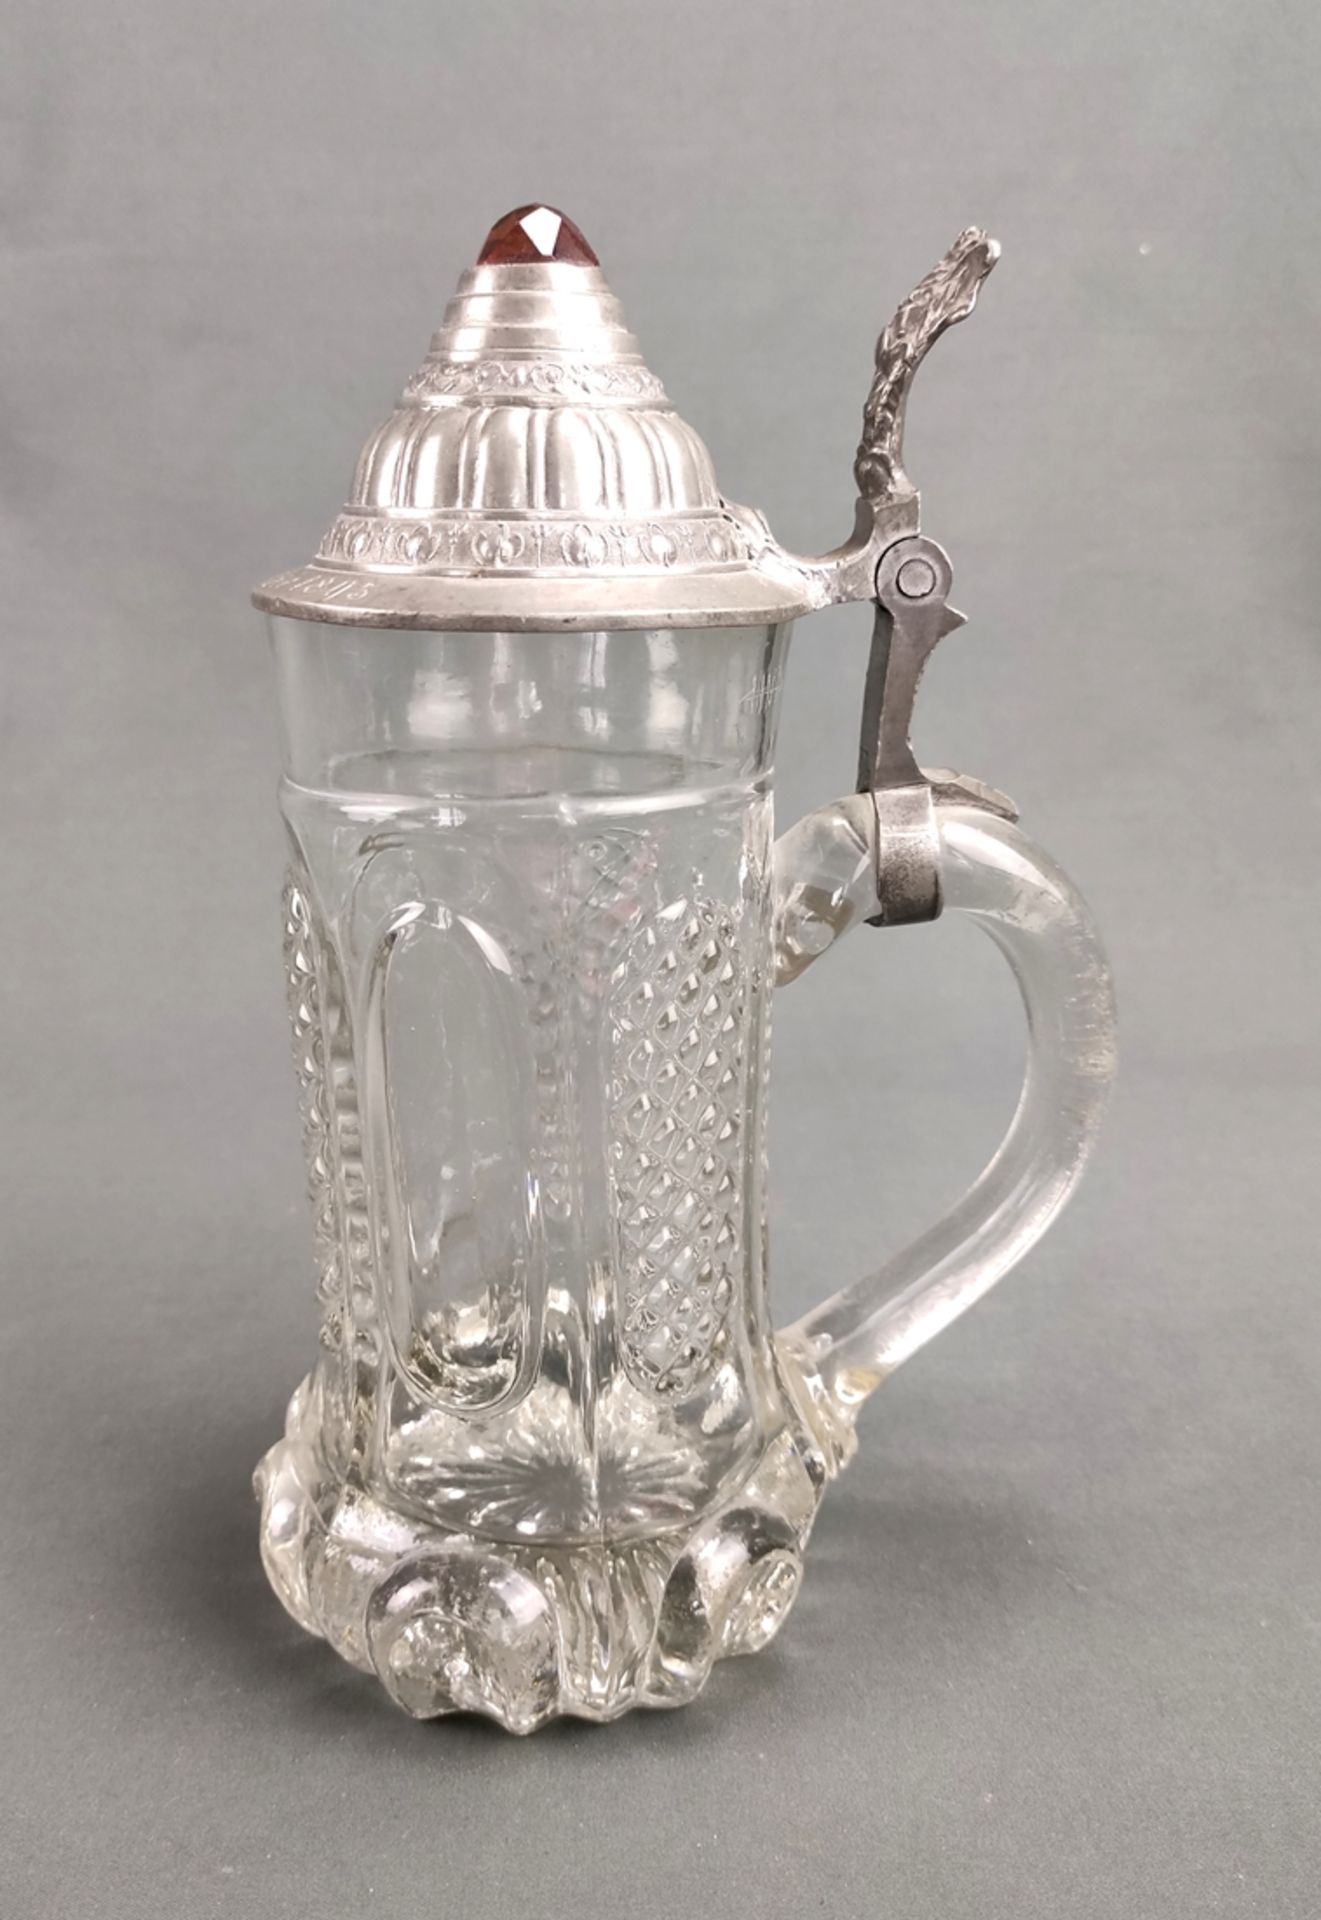 Glass jug with pewter mount, ornamental cut, stepped decorated pewter lid with cut gemstone, lid en